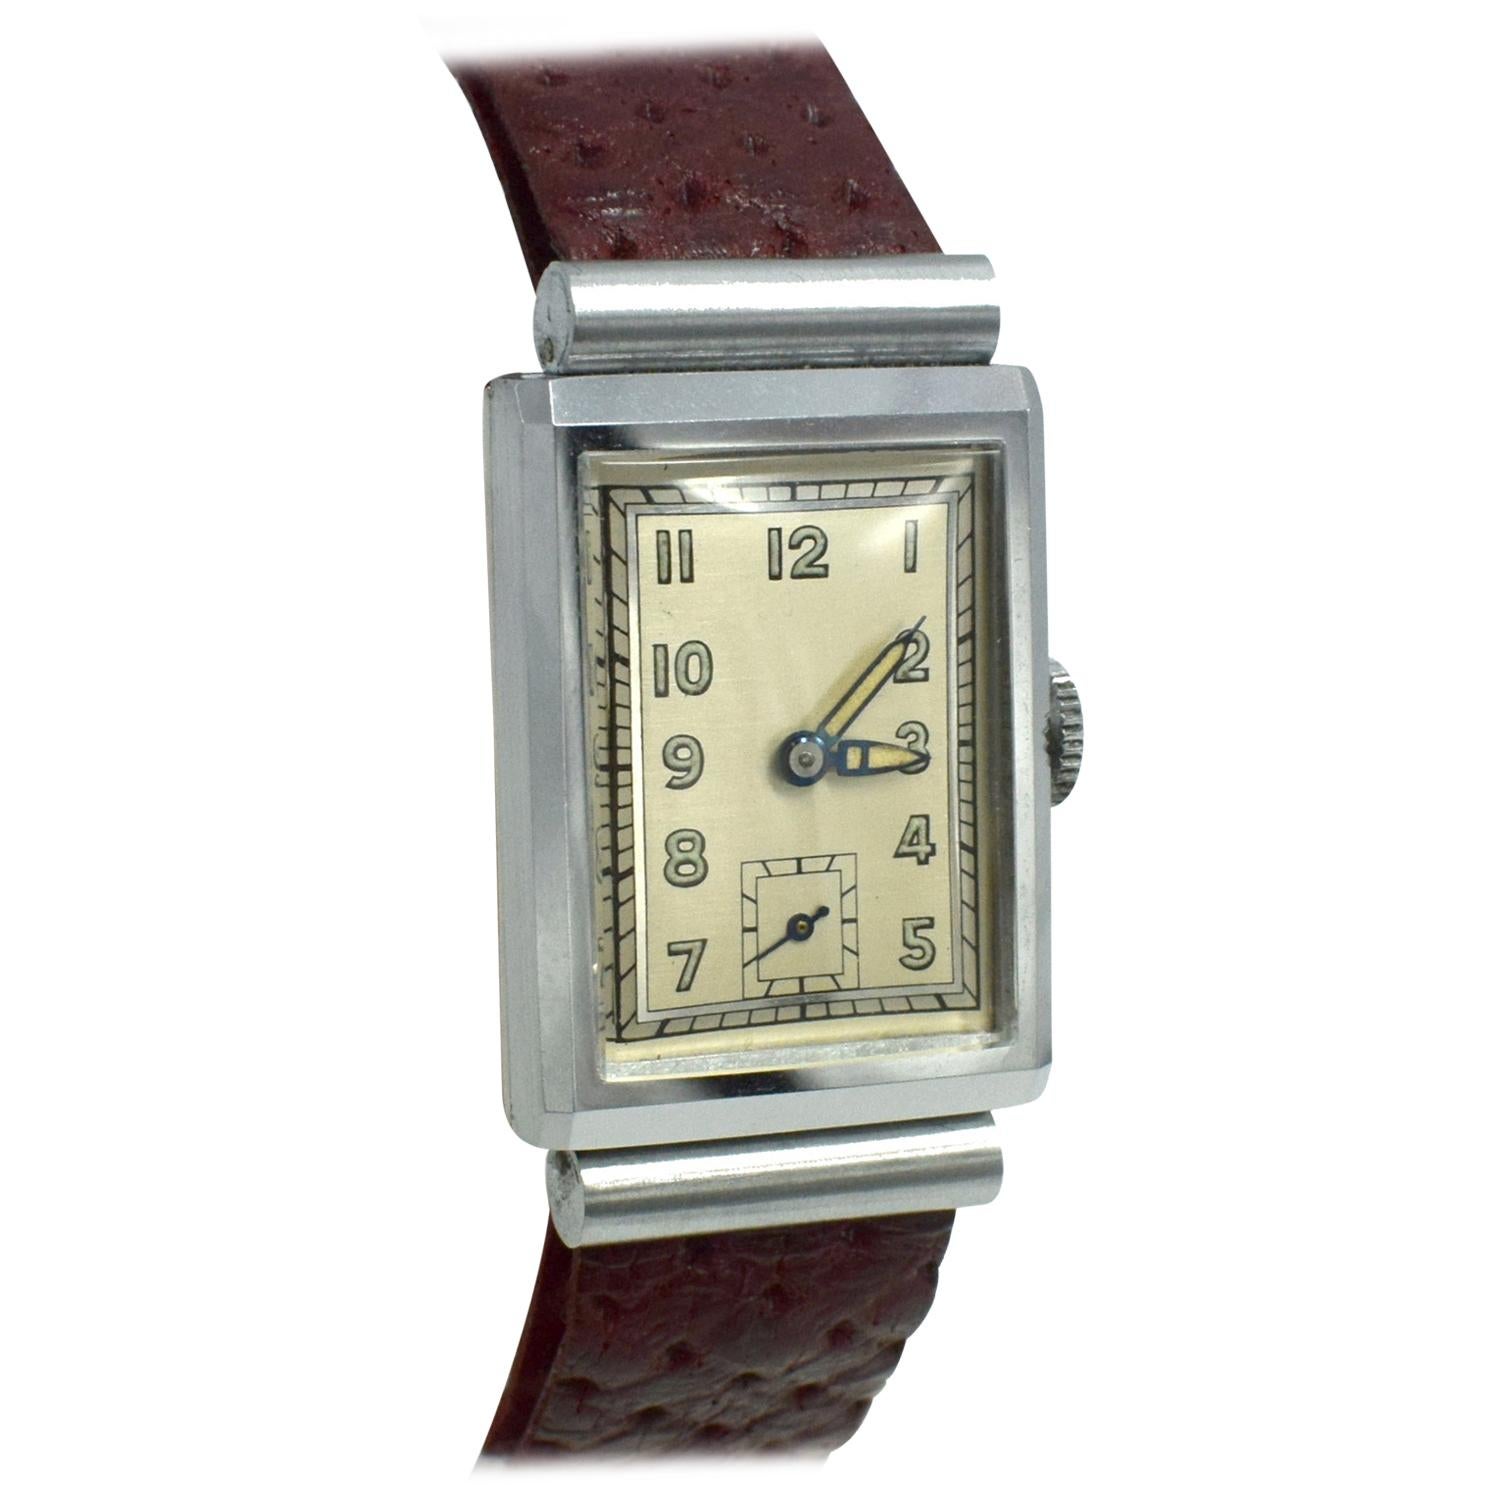 Art Deco Men’s Chrome Tank Manual Wristwatch, Never Used, Newly Serviced, 1930